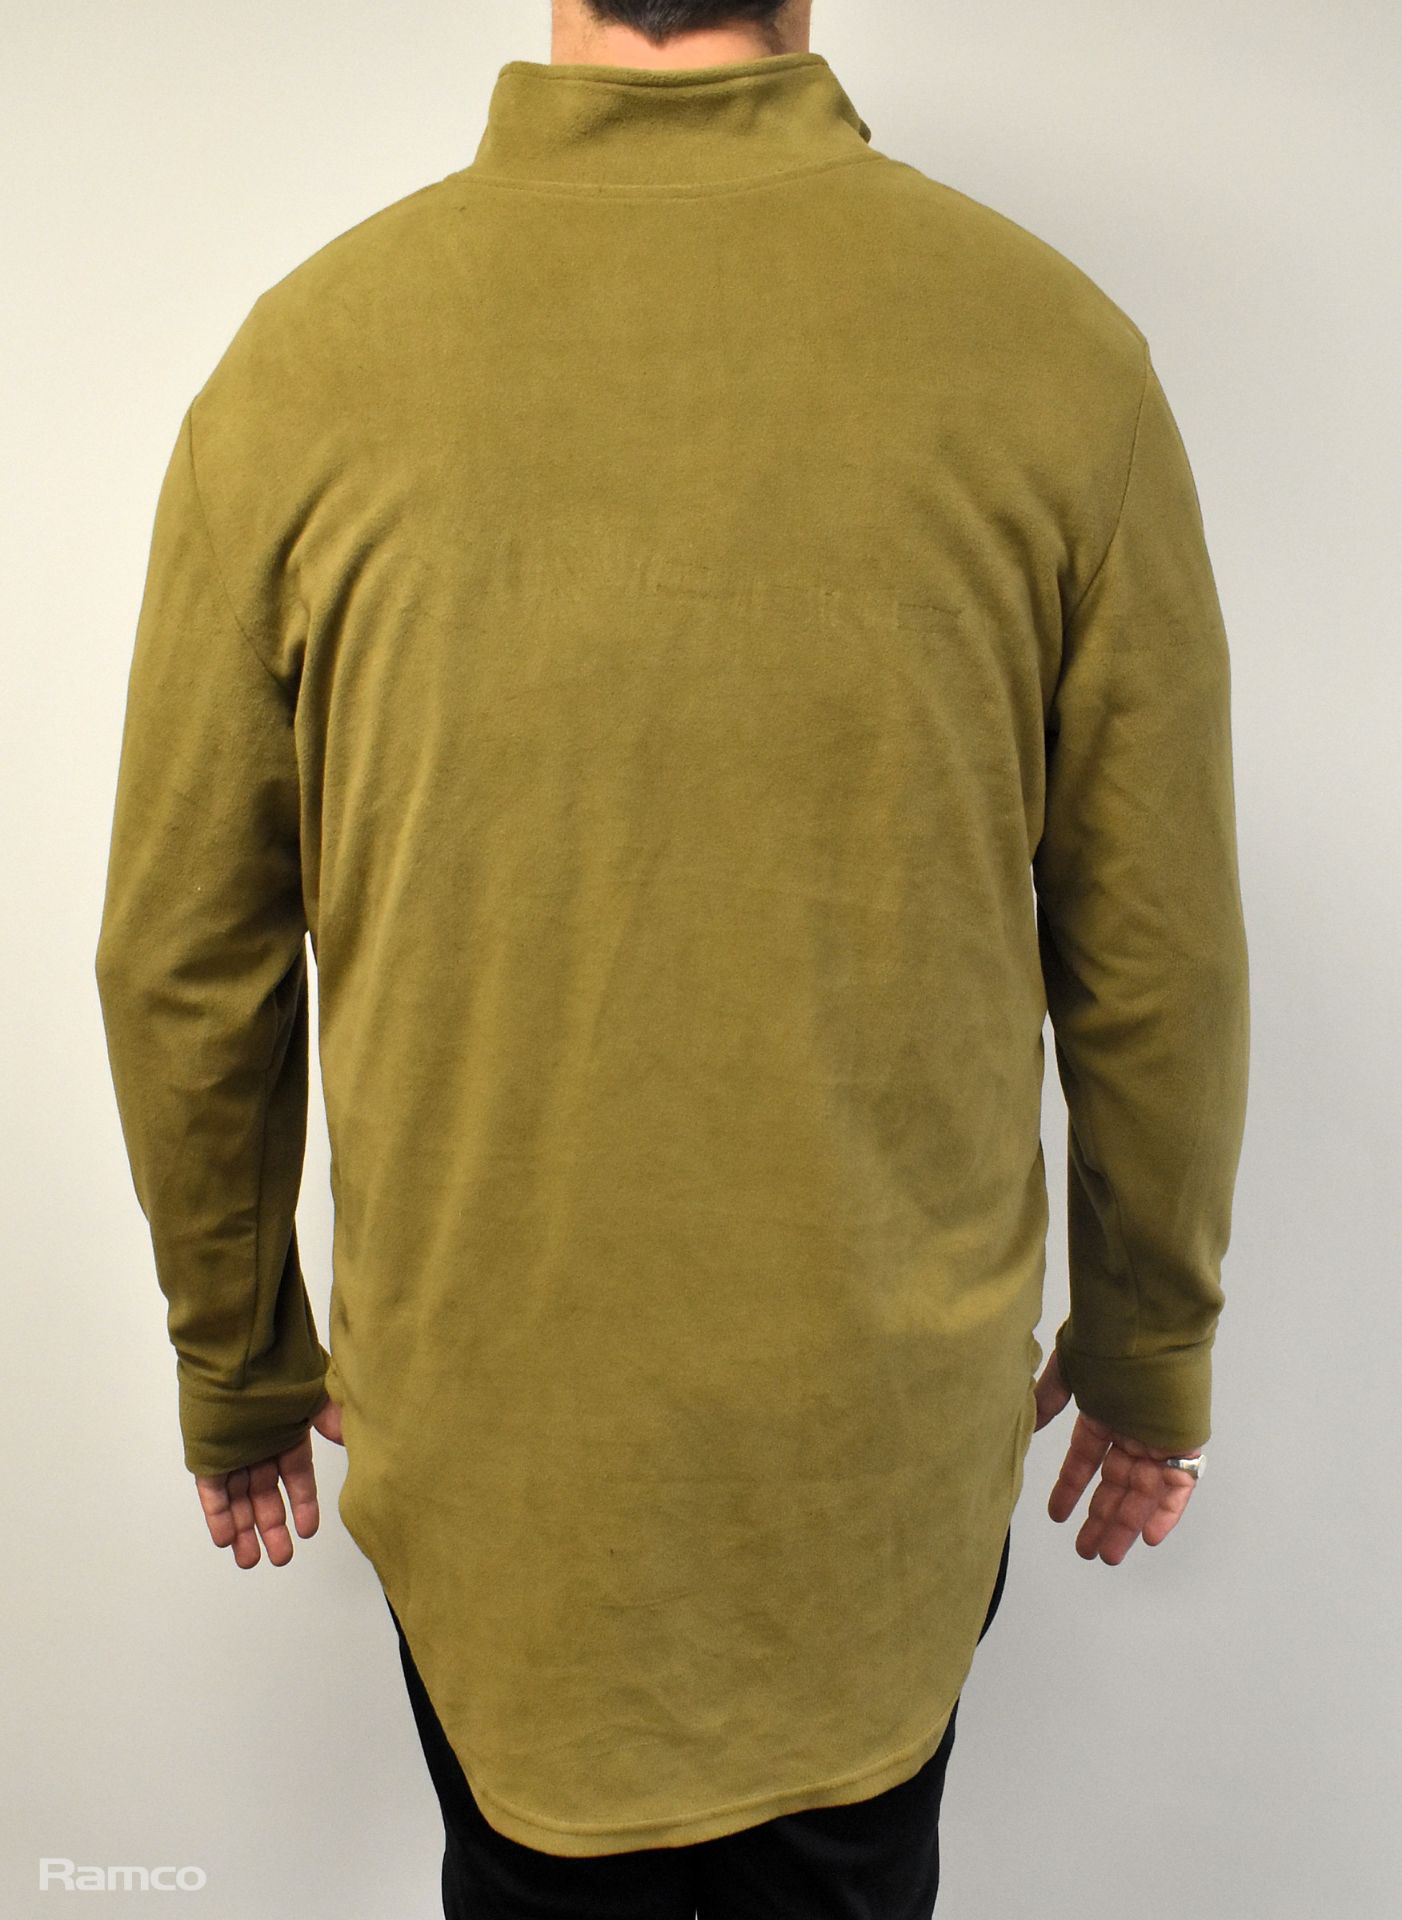 130x British Army Combat thermal undershirts - mixed colours - mixed grades and sizes - Image 3 of 10